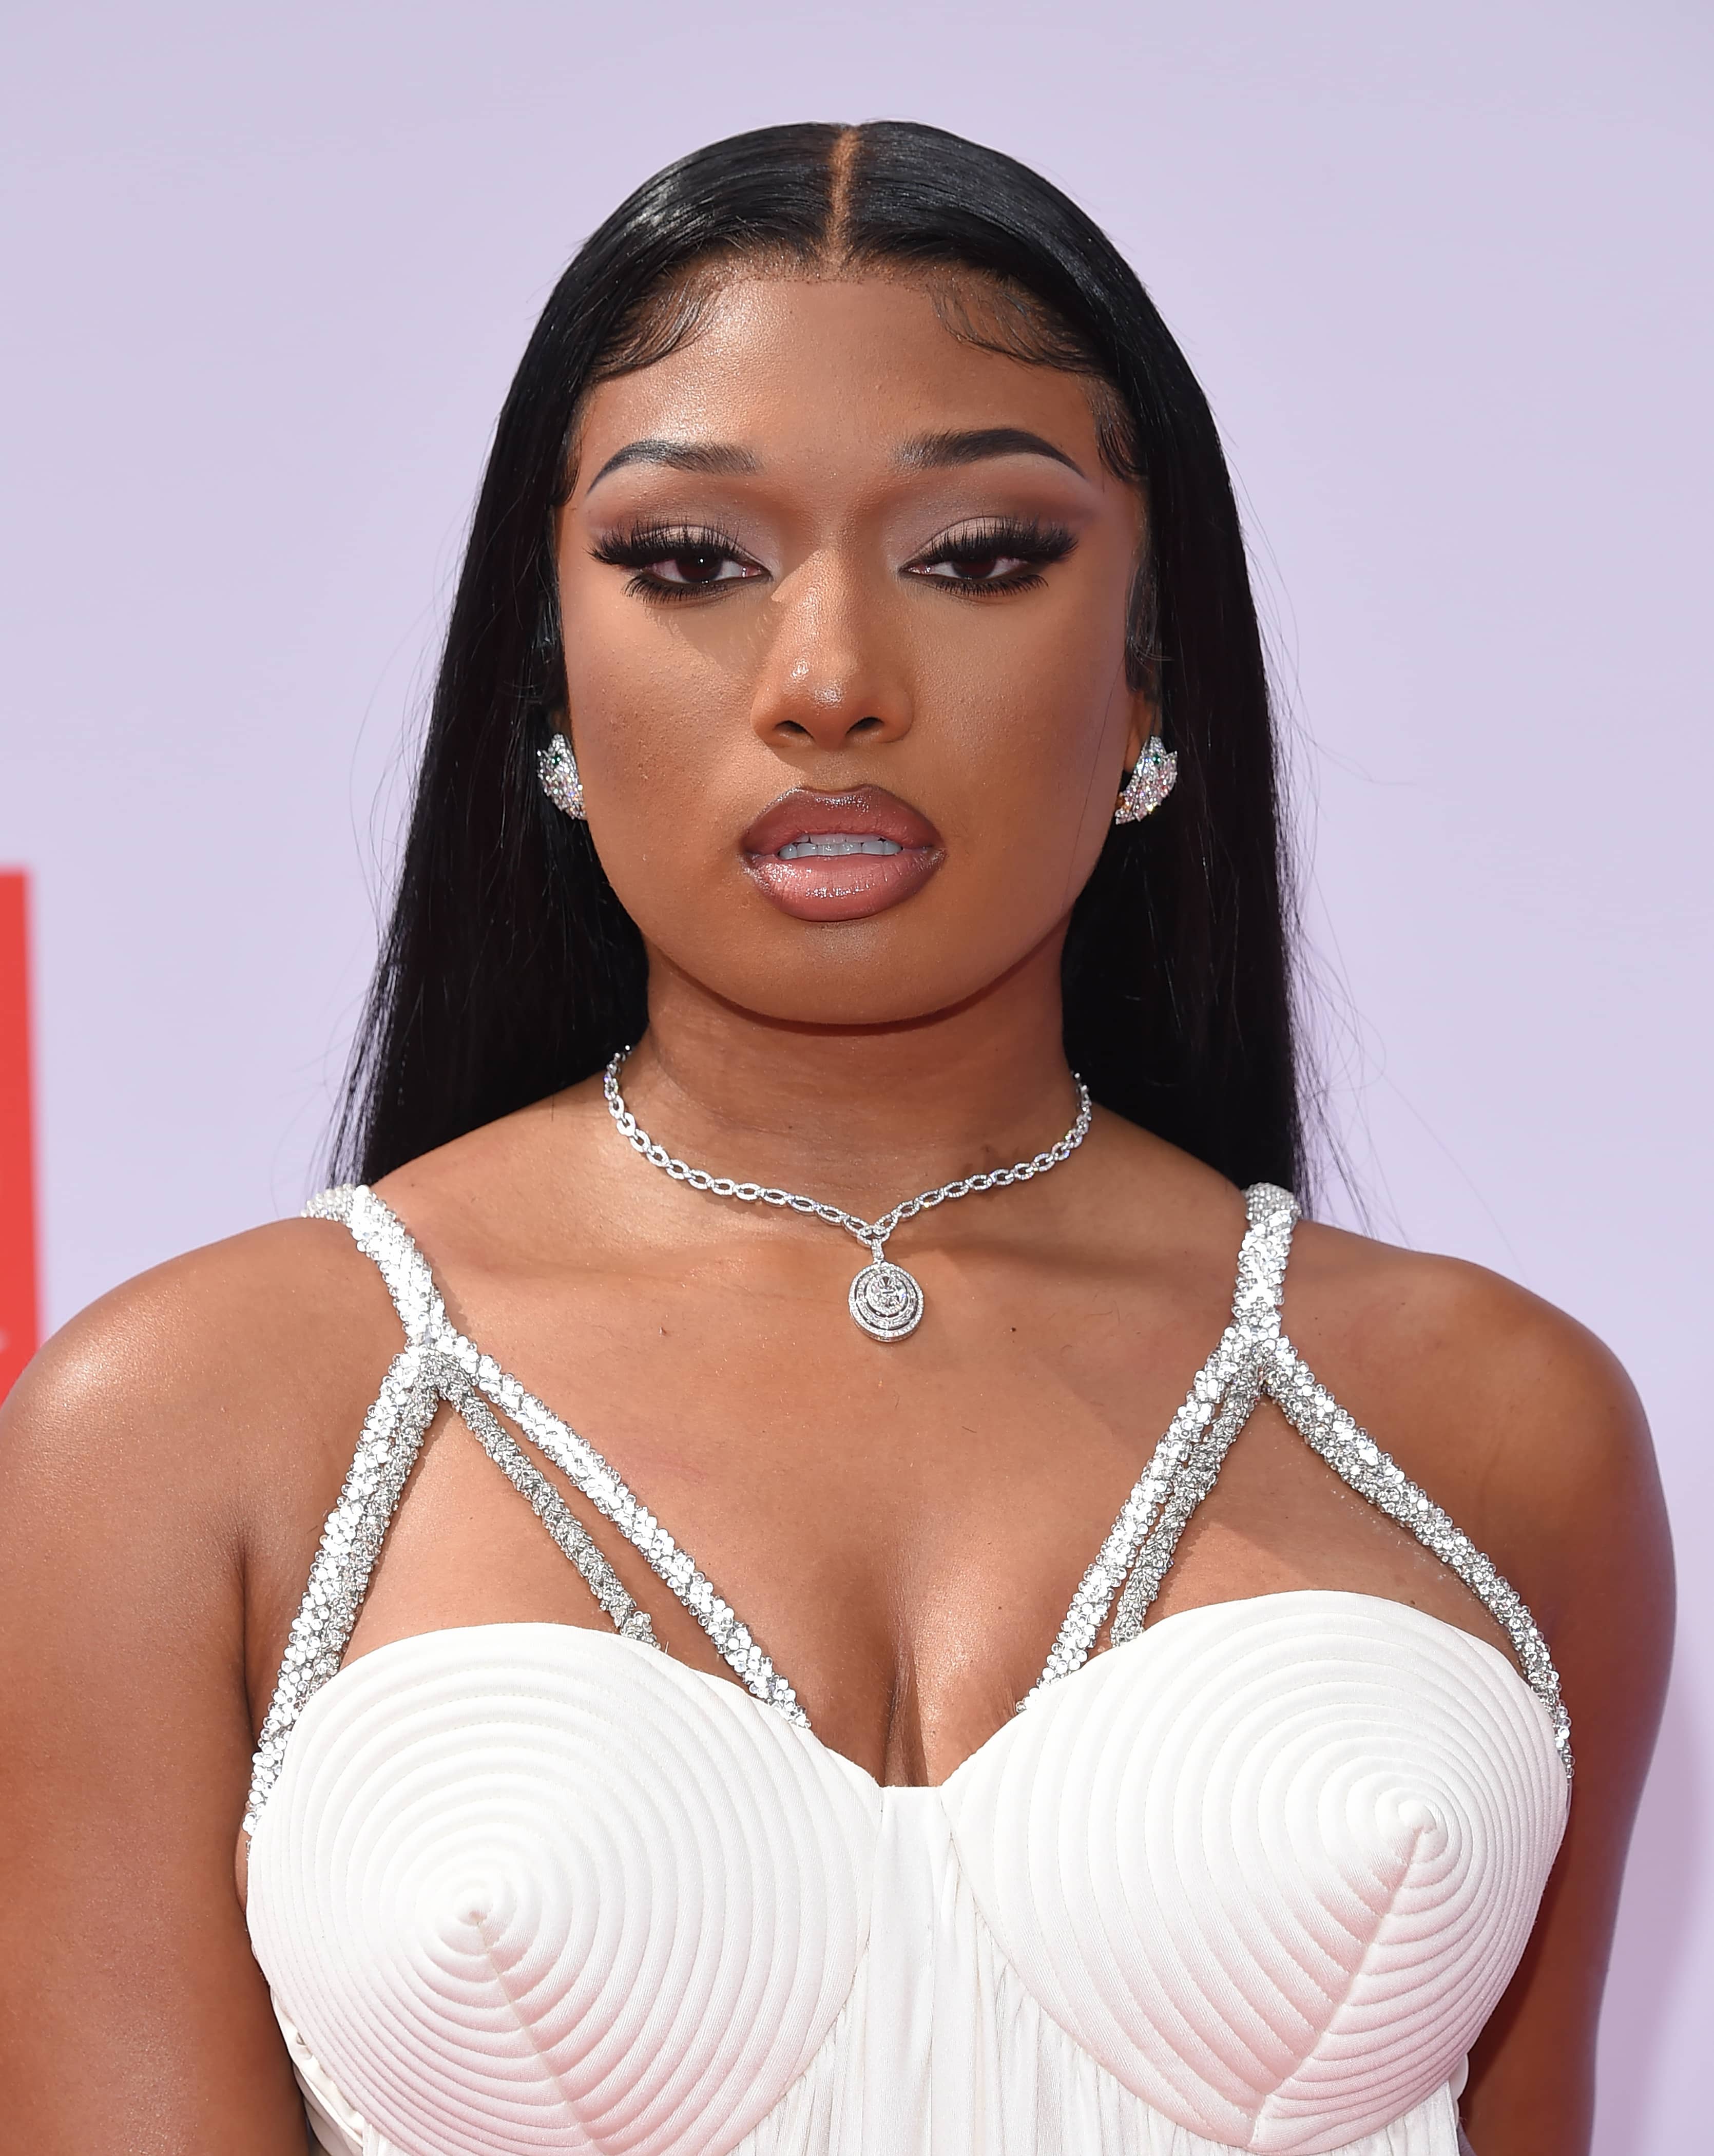  JUN 27: Megan Thee Stallion {Object} arrives for the 2021 BET Awards on June 27, 2021 in Los Angeles, CA